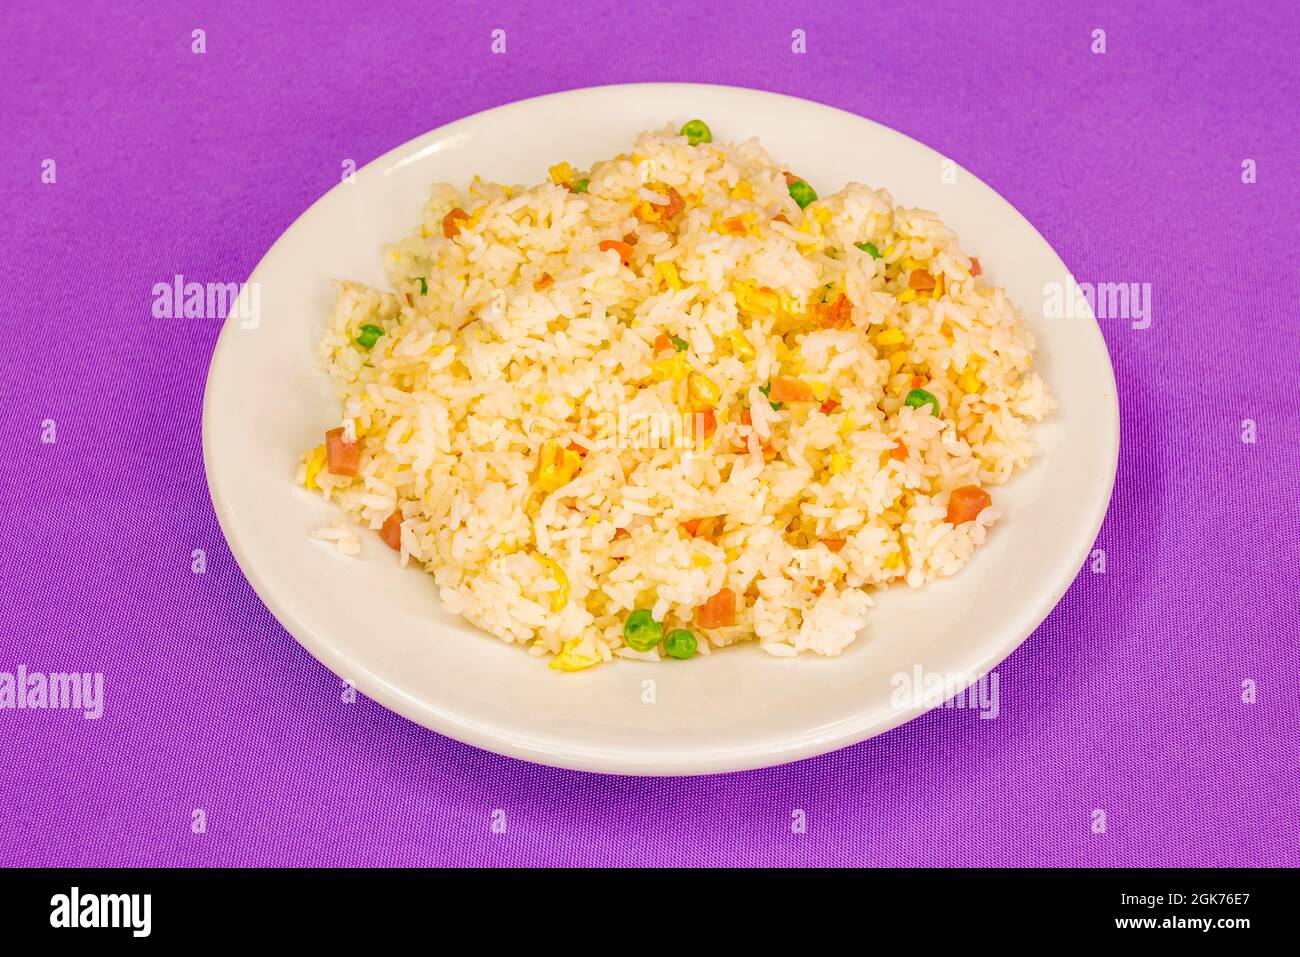 Three delights rice prepared in Chinese restaurant on purple tablecloth Stock Photo